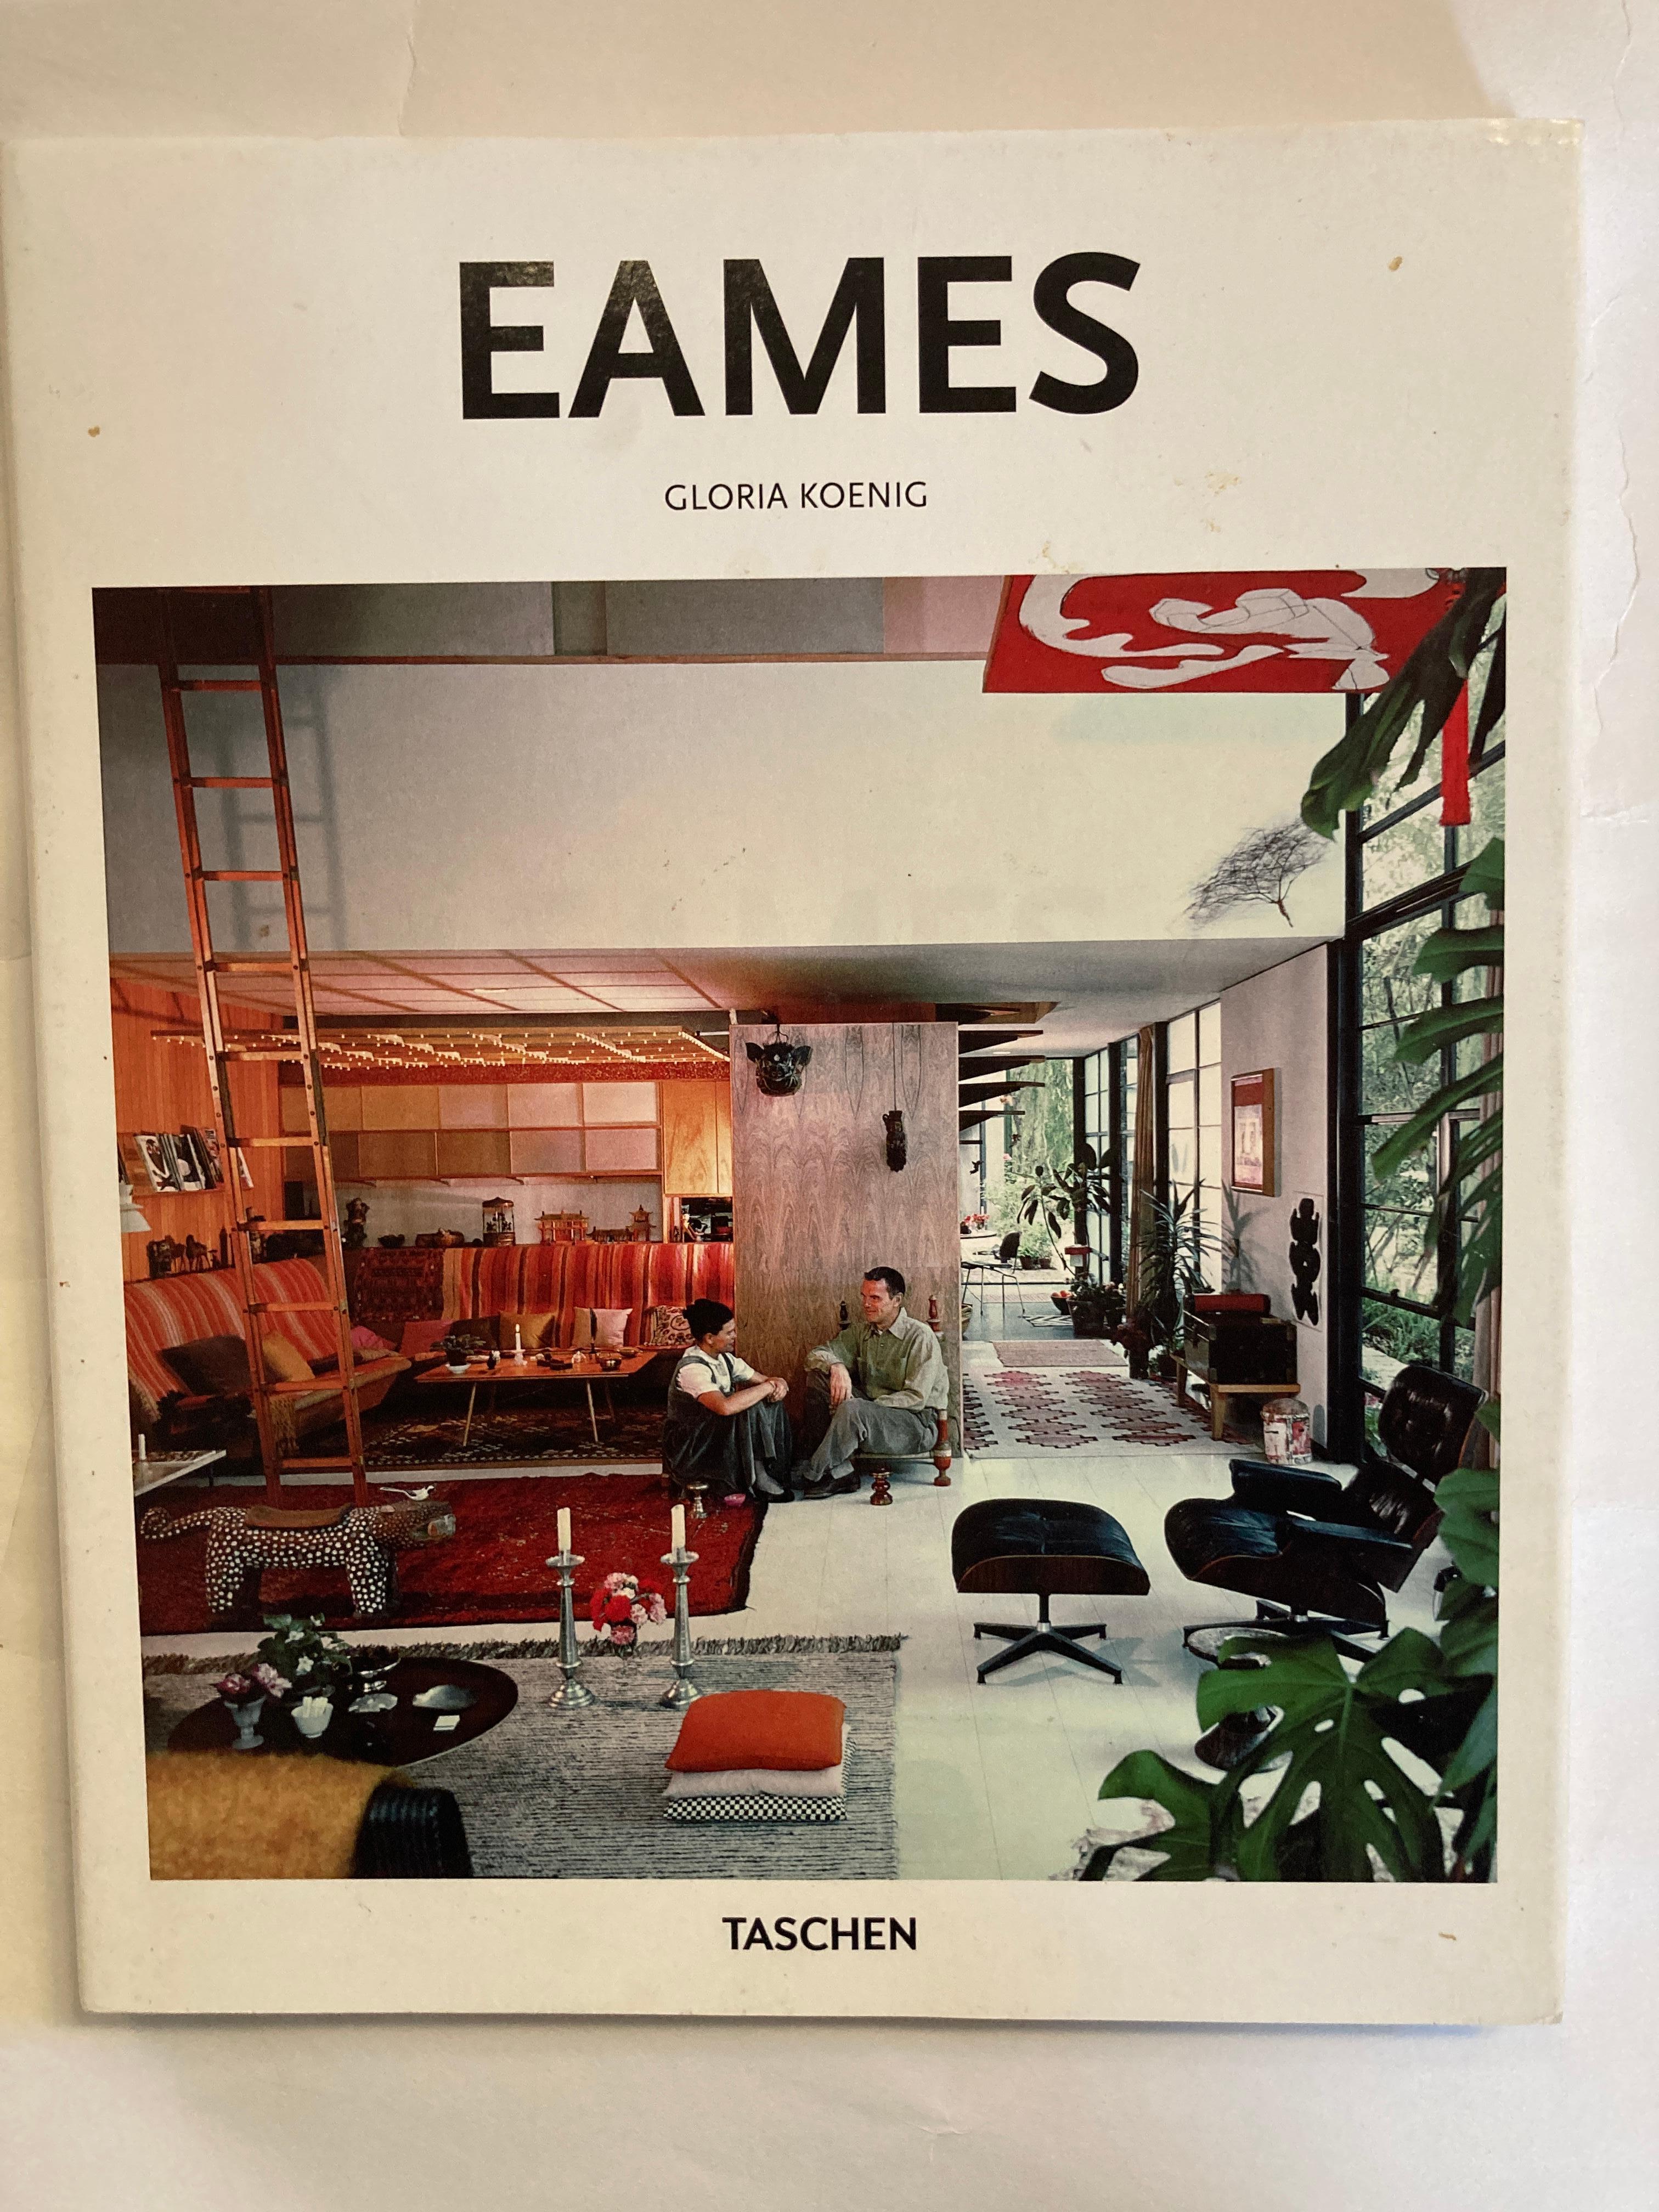 Set of three Taschen hardcover books Eames, case study, Mies van der Rohe.
1st book is : Eames by Taschen
Creative duo Charles and Ray Eames were one of the most transformative forces in design history: through furniture, photography,